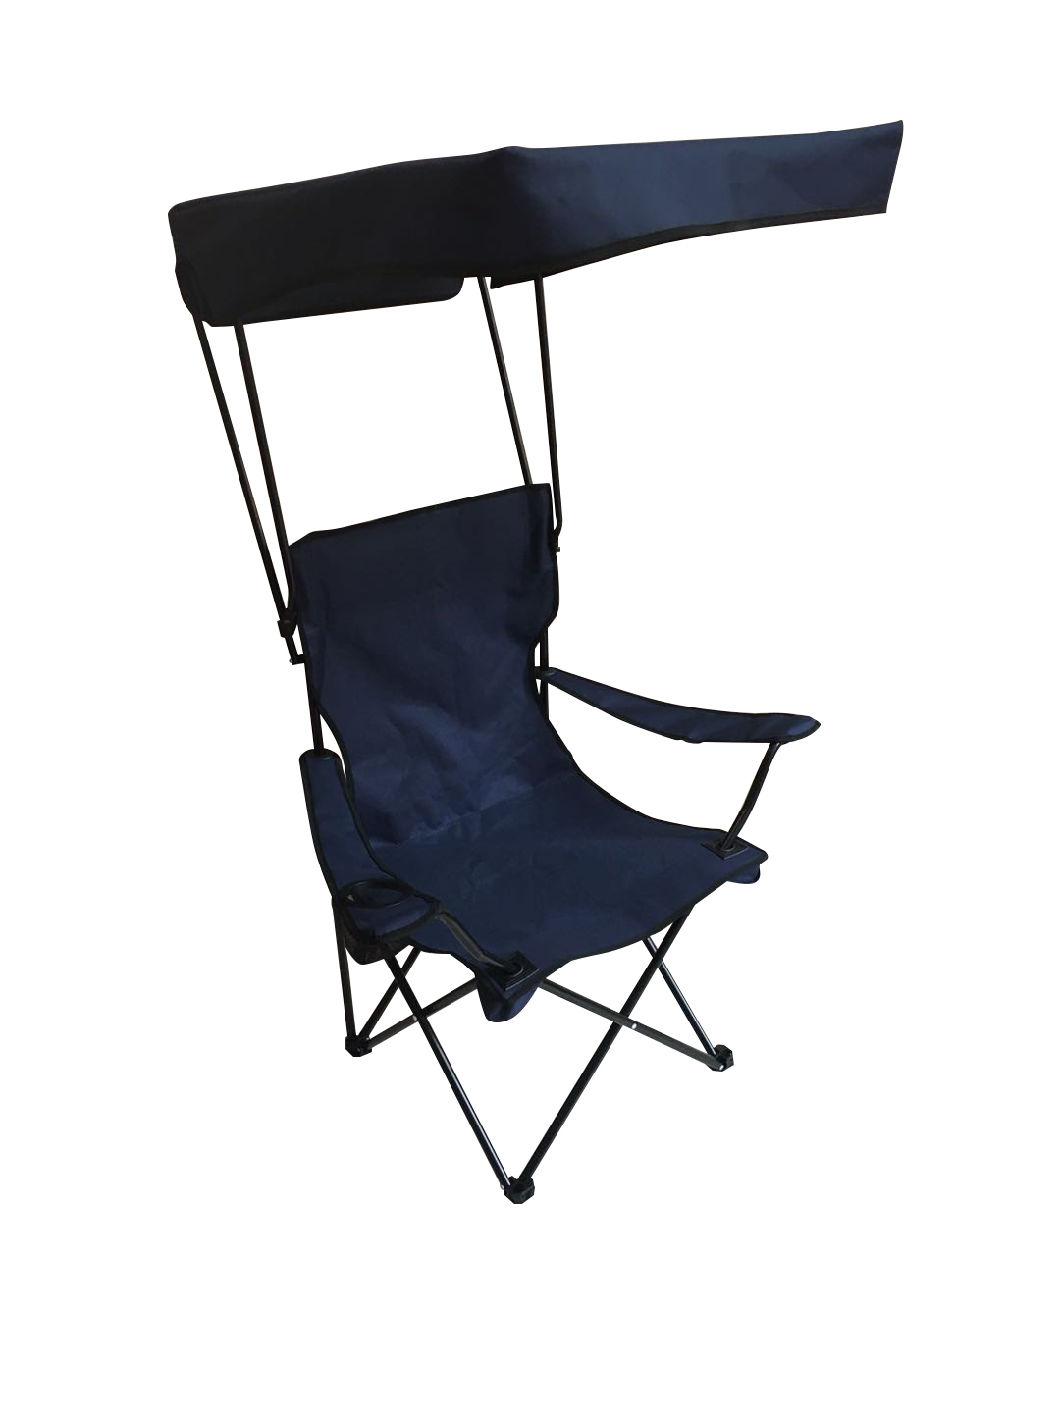 Popular Outdoor Camping Chair with Canopy